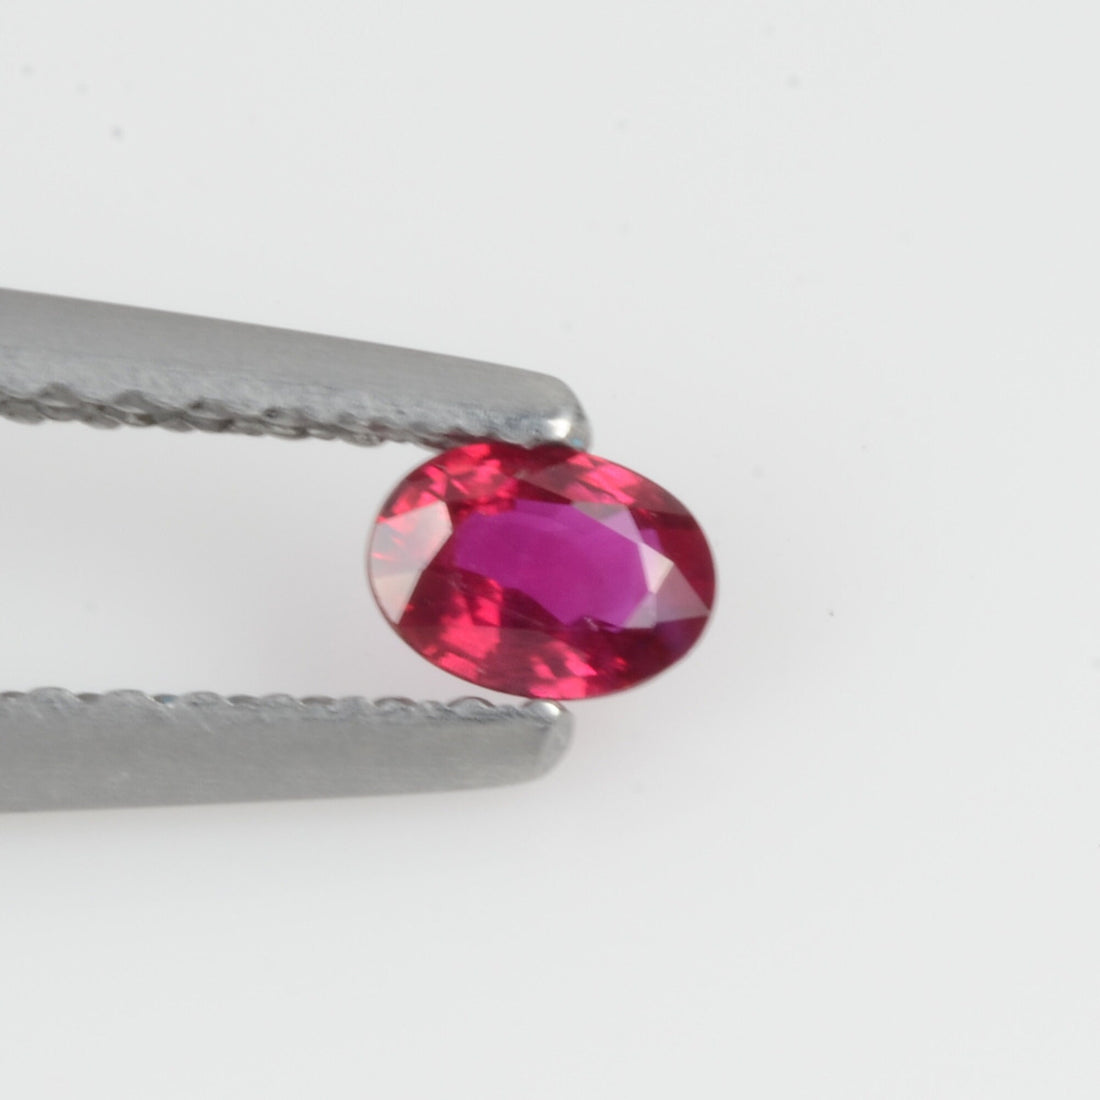 0.16 Cts Natural Ruby Loose Gemstone Oval Cut